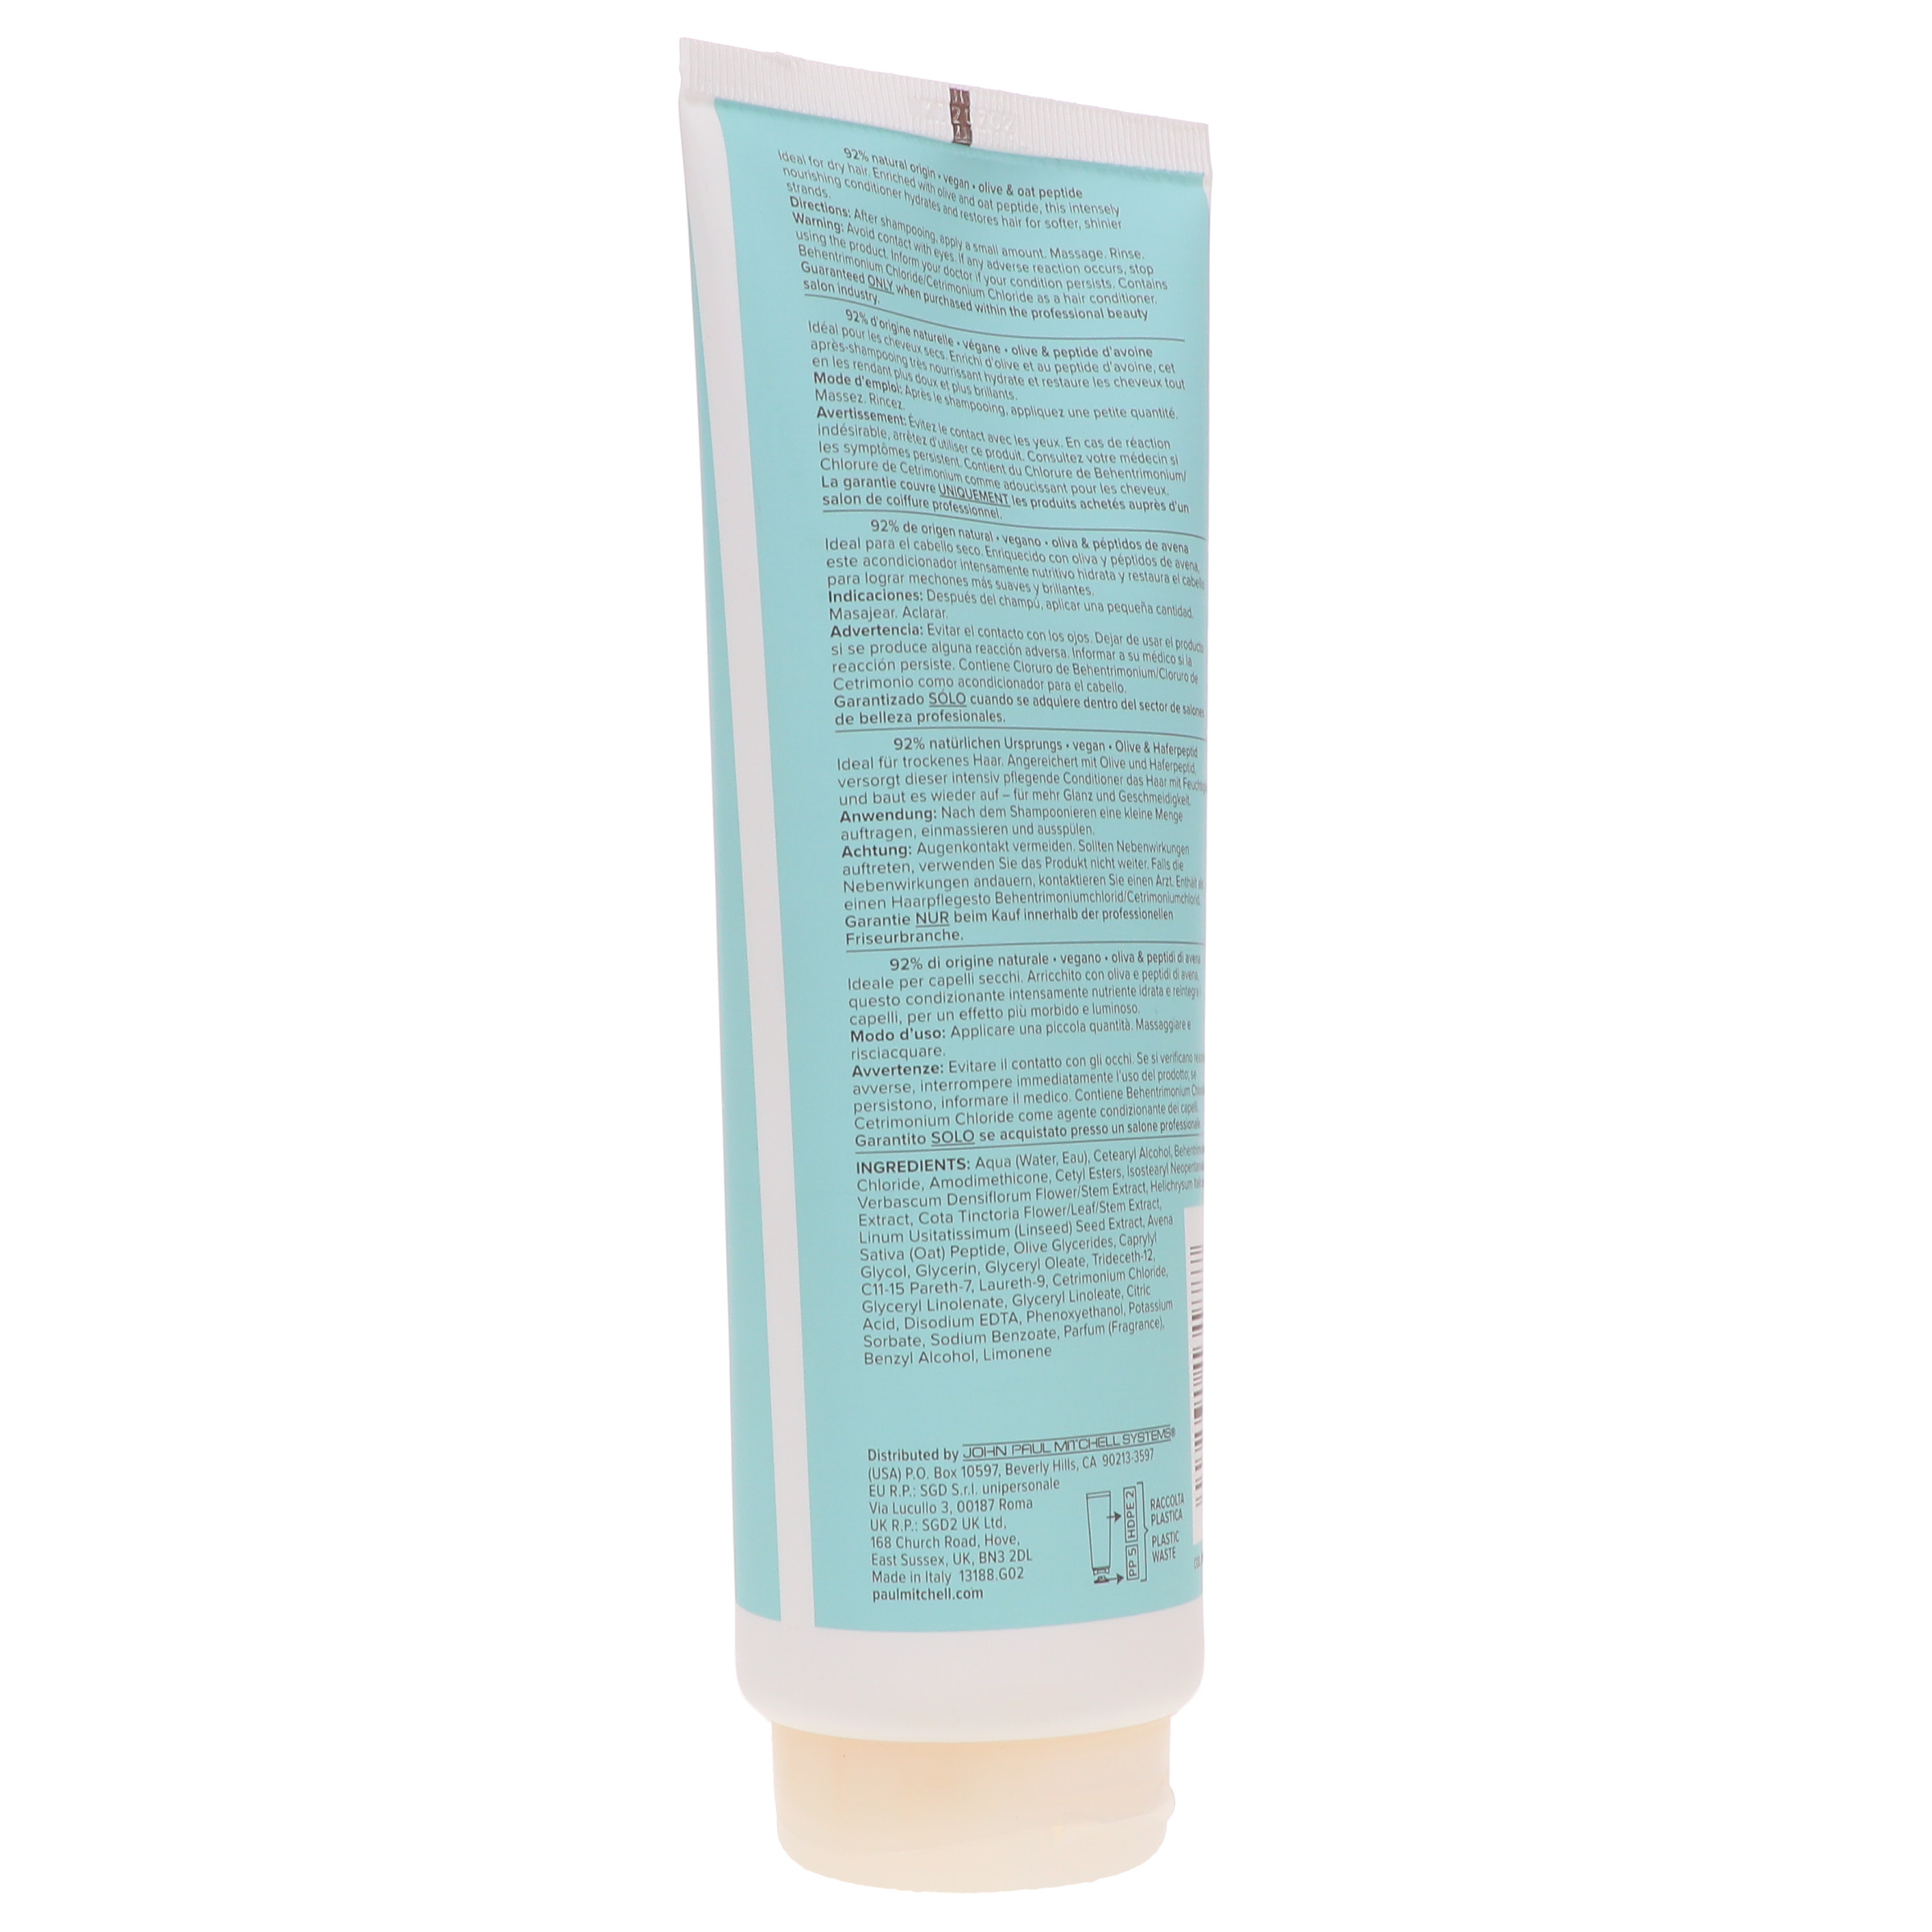 Paul Mitchell Clean Beauty Hydrate Conditioner 8.5 oz - image 4 of 8